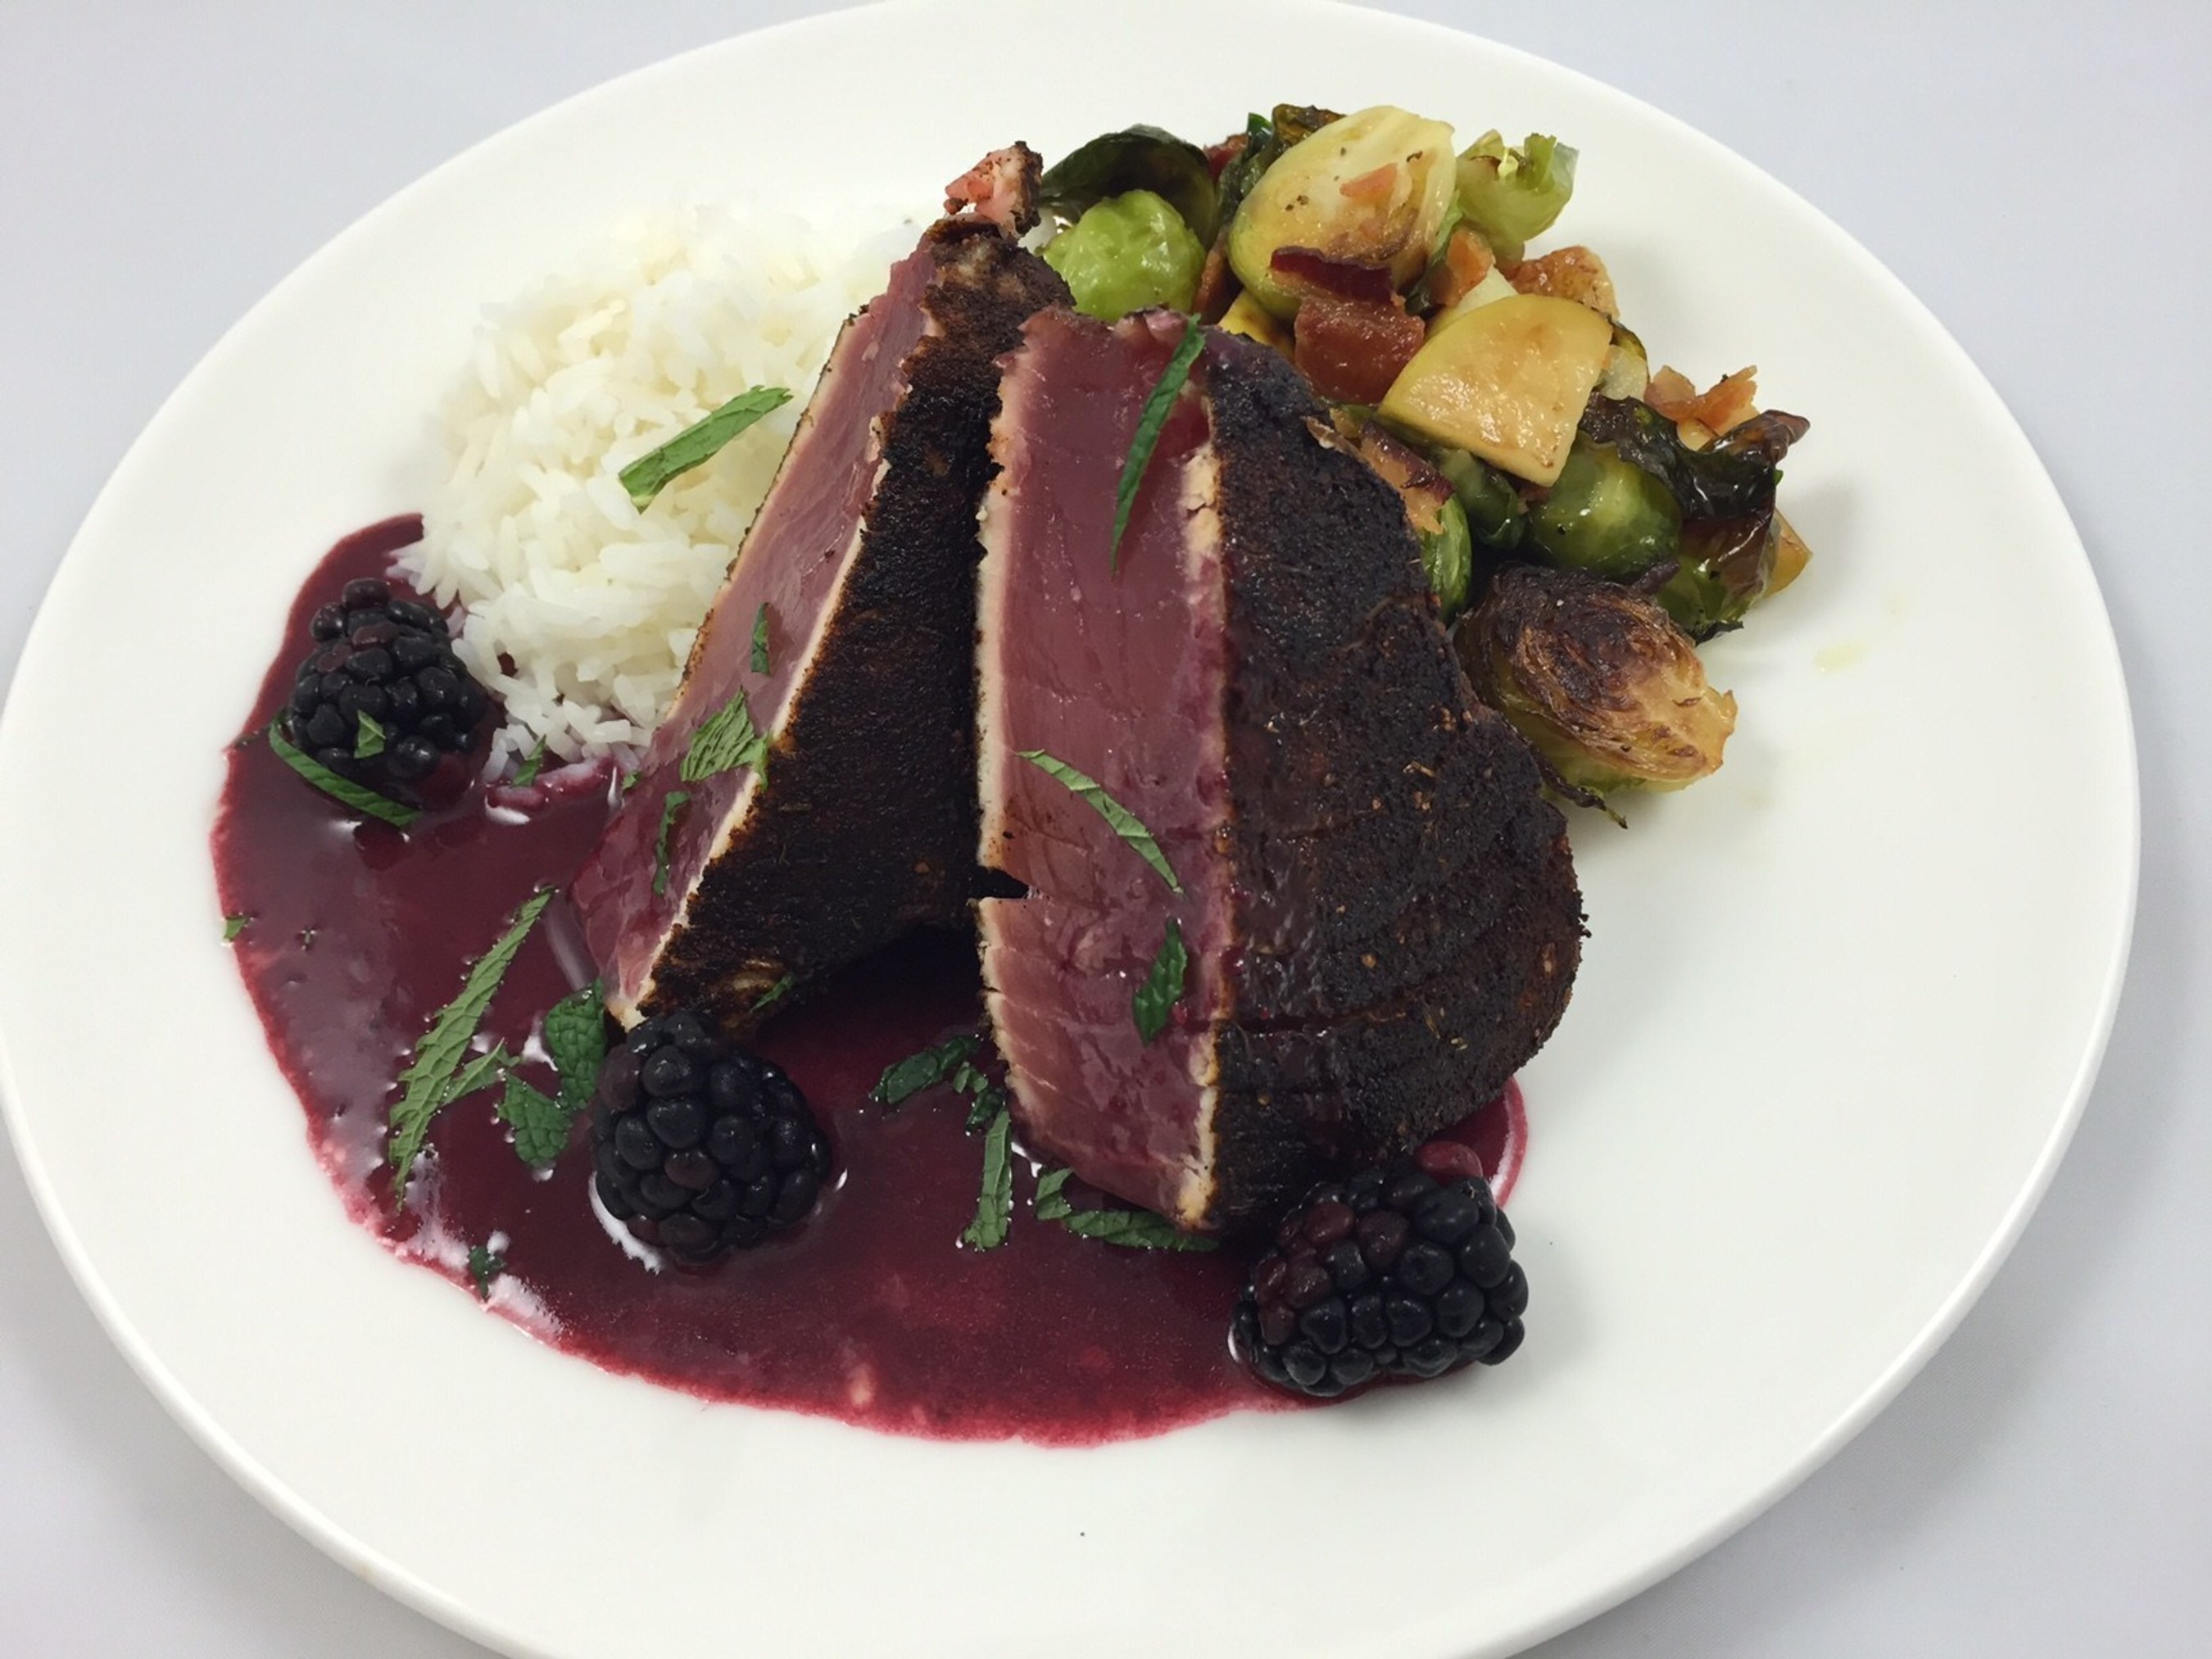 Legal Sea Foods is serving up two d-electable presidential dishes leading up to Election Day.  Guests at all restaurants can choose between the "Secretary of Steak" (pictured here) or the "Trump Tower."  The Clinton-inspired dish is a liberal helping of blackened tuna steak with jasmine rice, bacon-braised Brussels sprouts and blackberry beurre rouge.